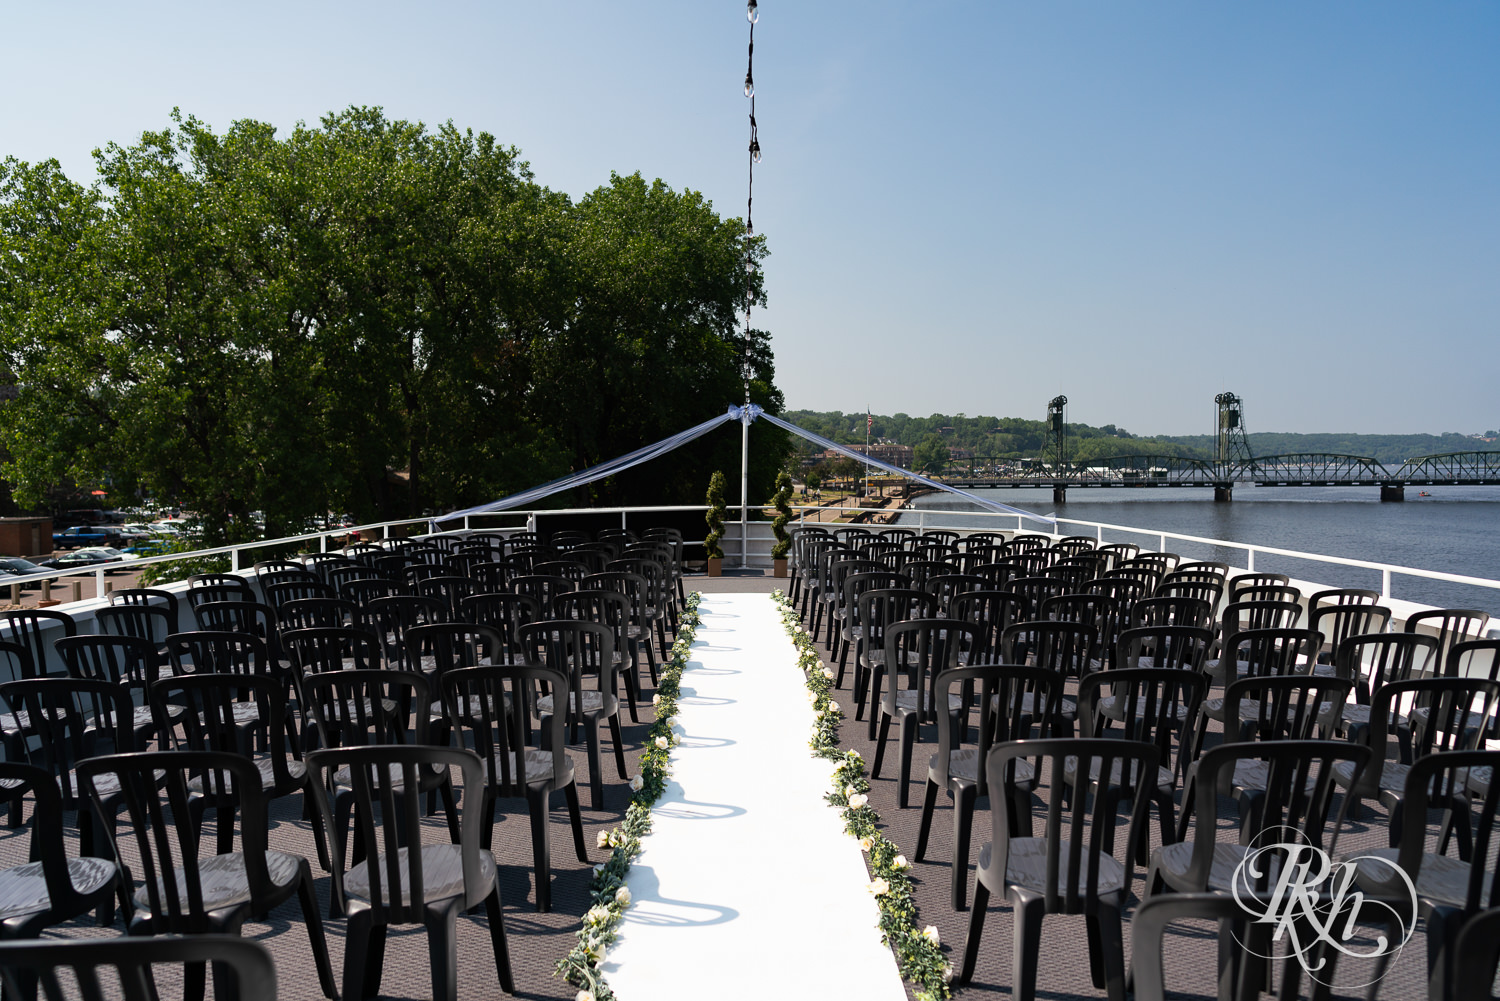 Summer ceremony setup on the Majestic Star in Stillwater River Boats in Minnesota.